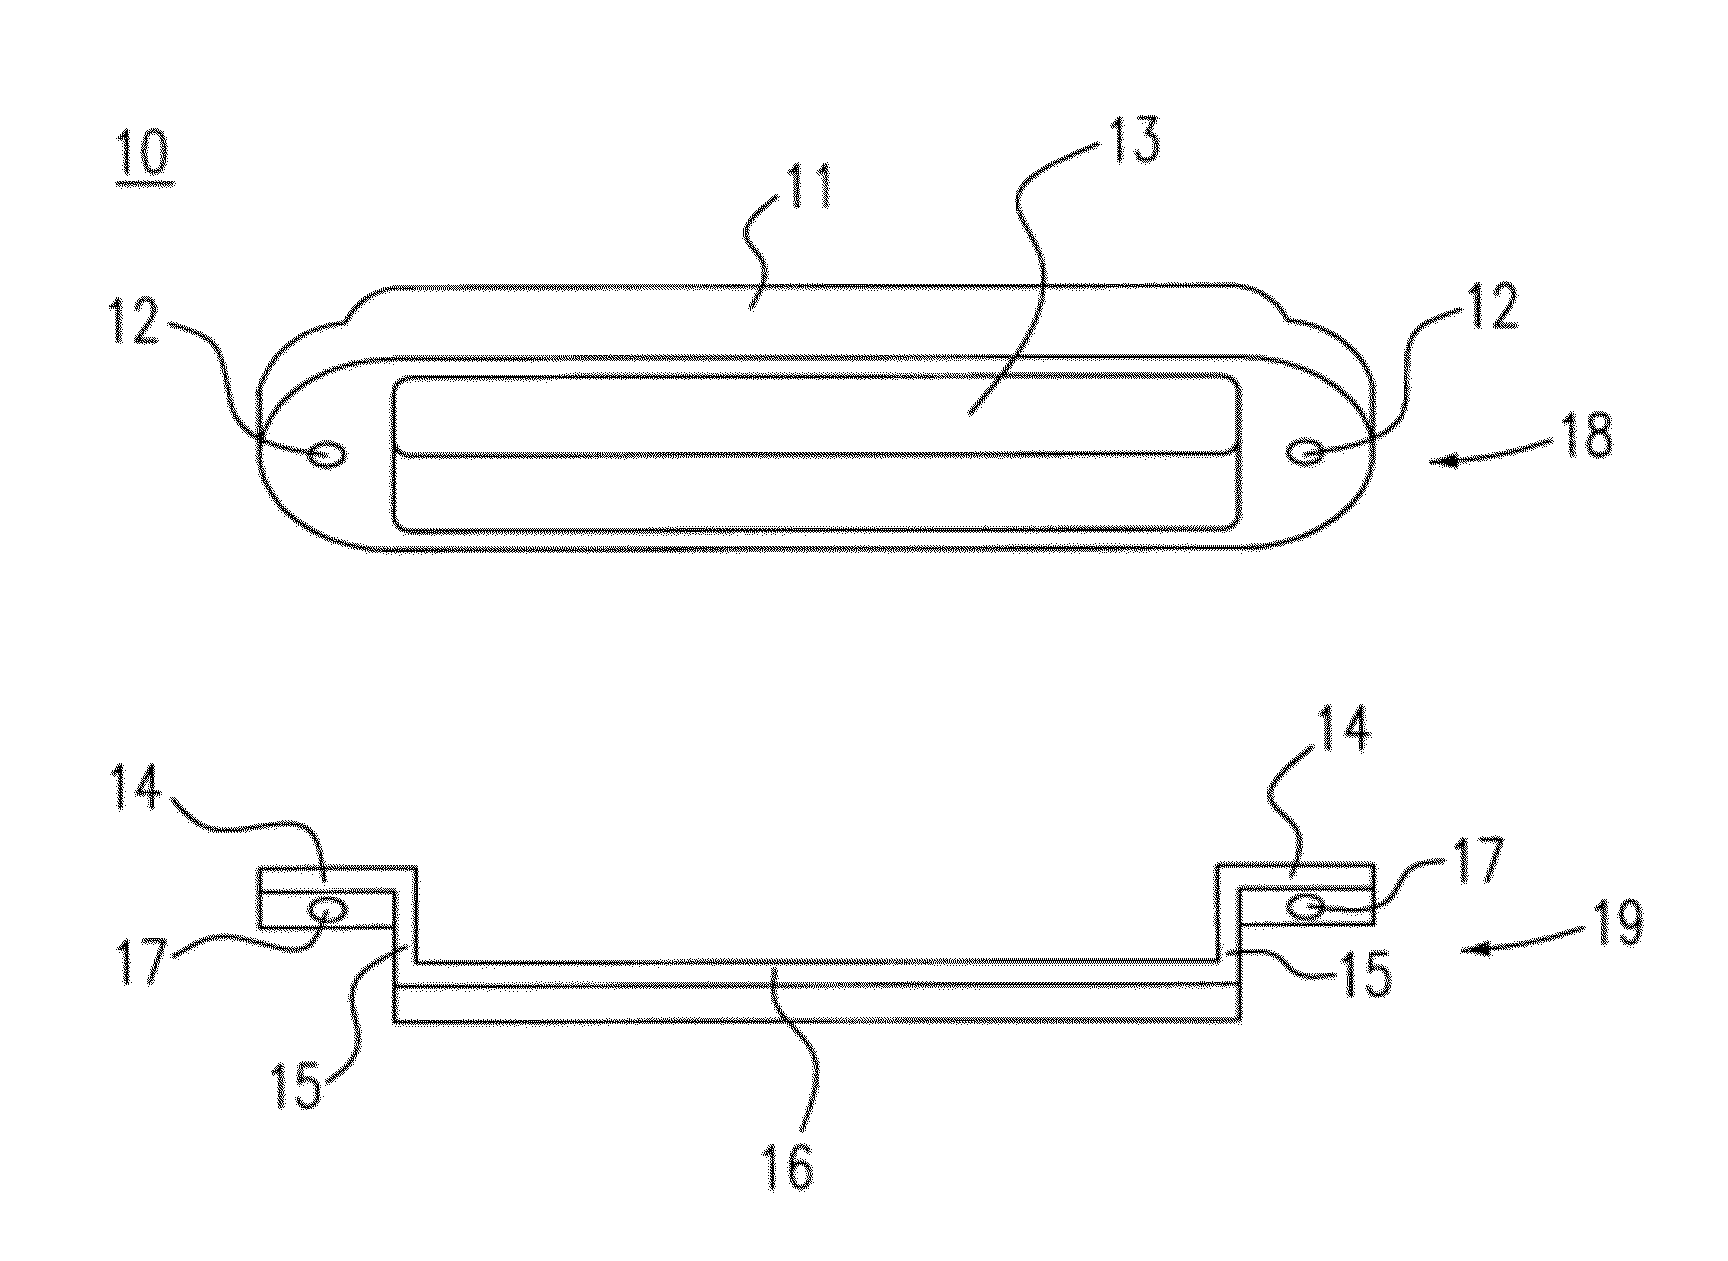 Apparatus for removal of docking plate in semiconductor equipment